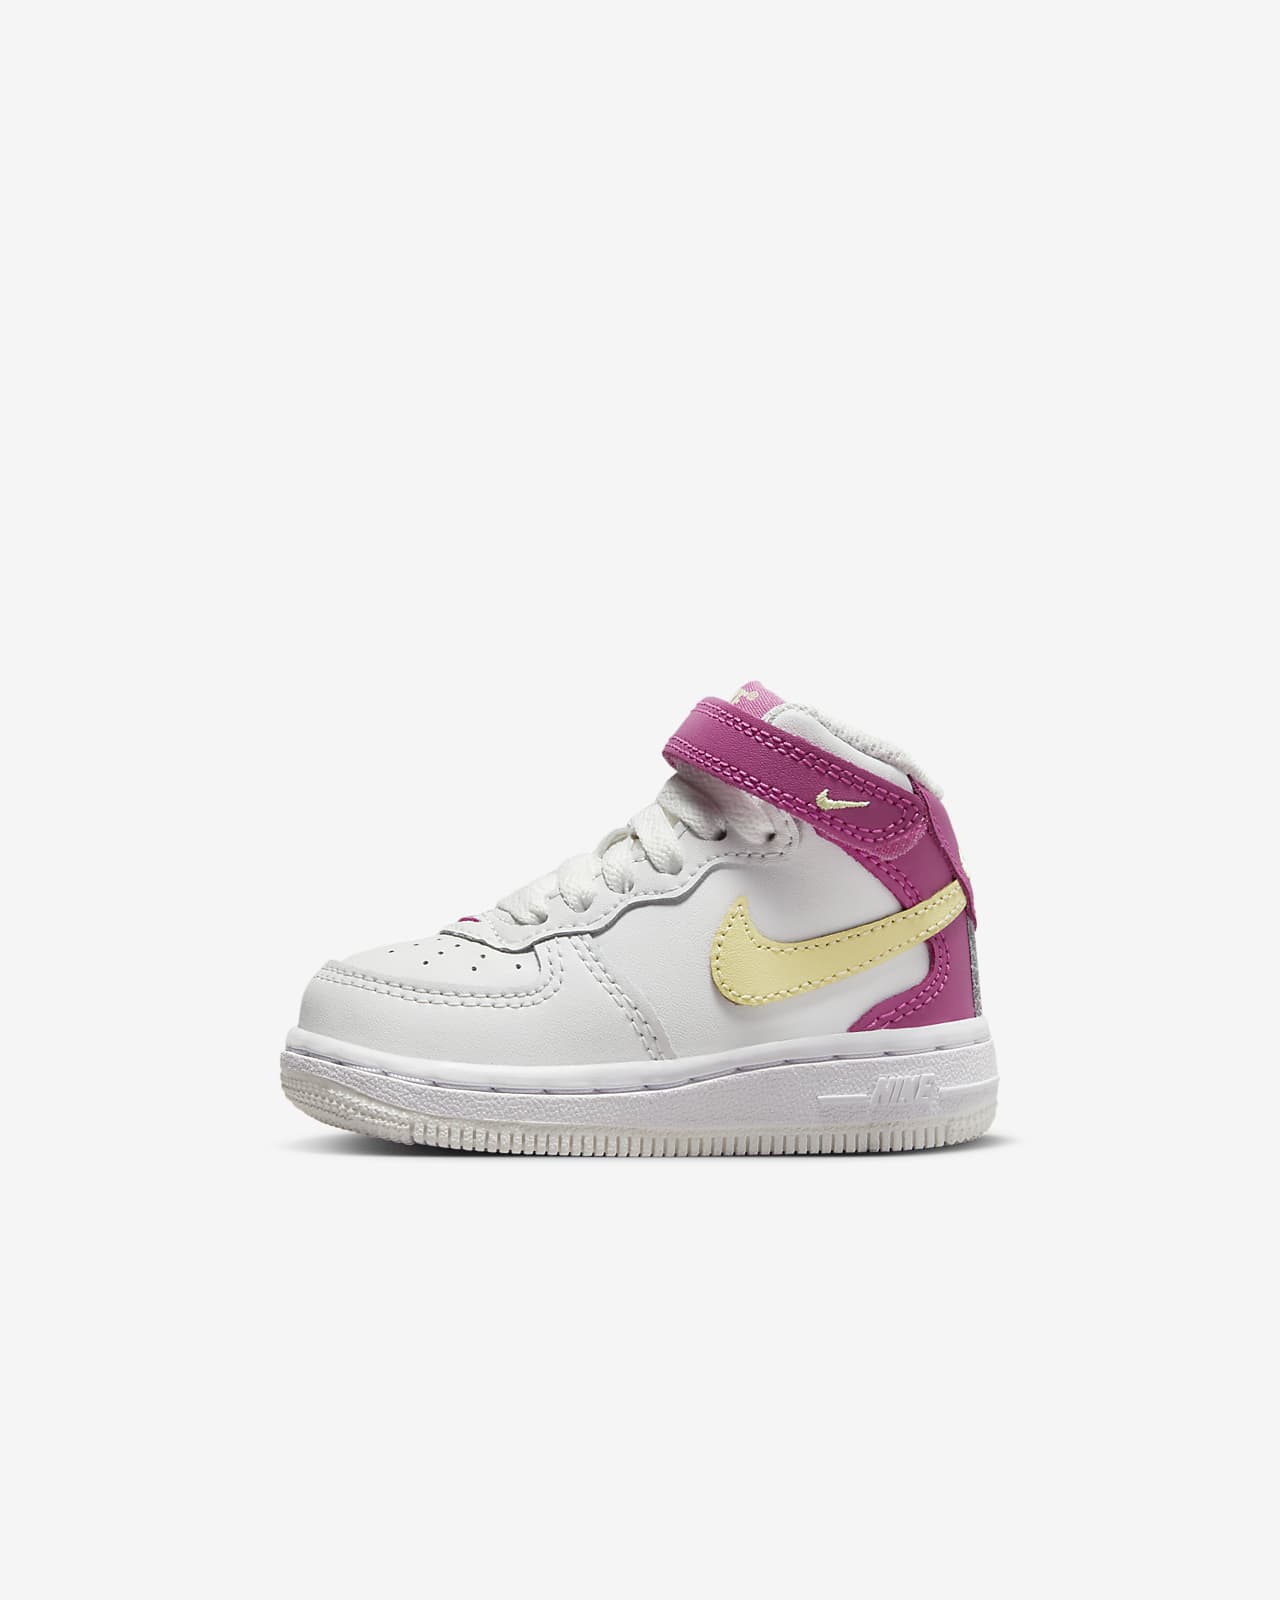 nike force 1 lv8 2 baby/toddler shoes